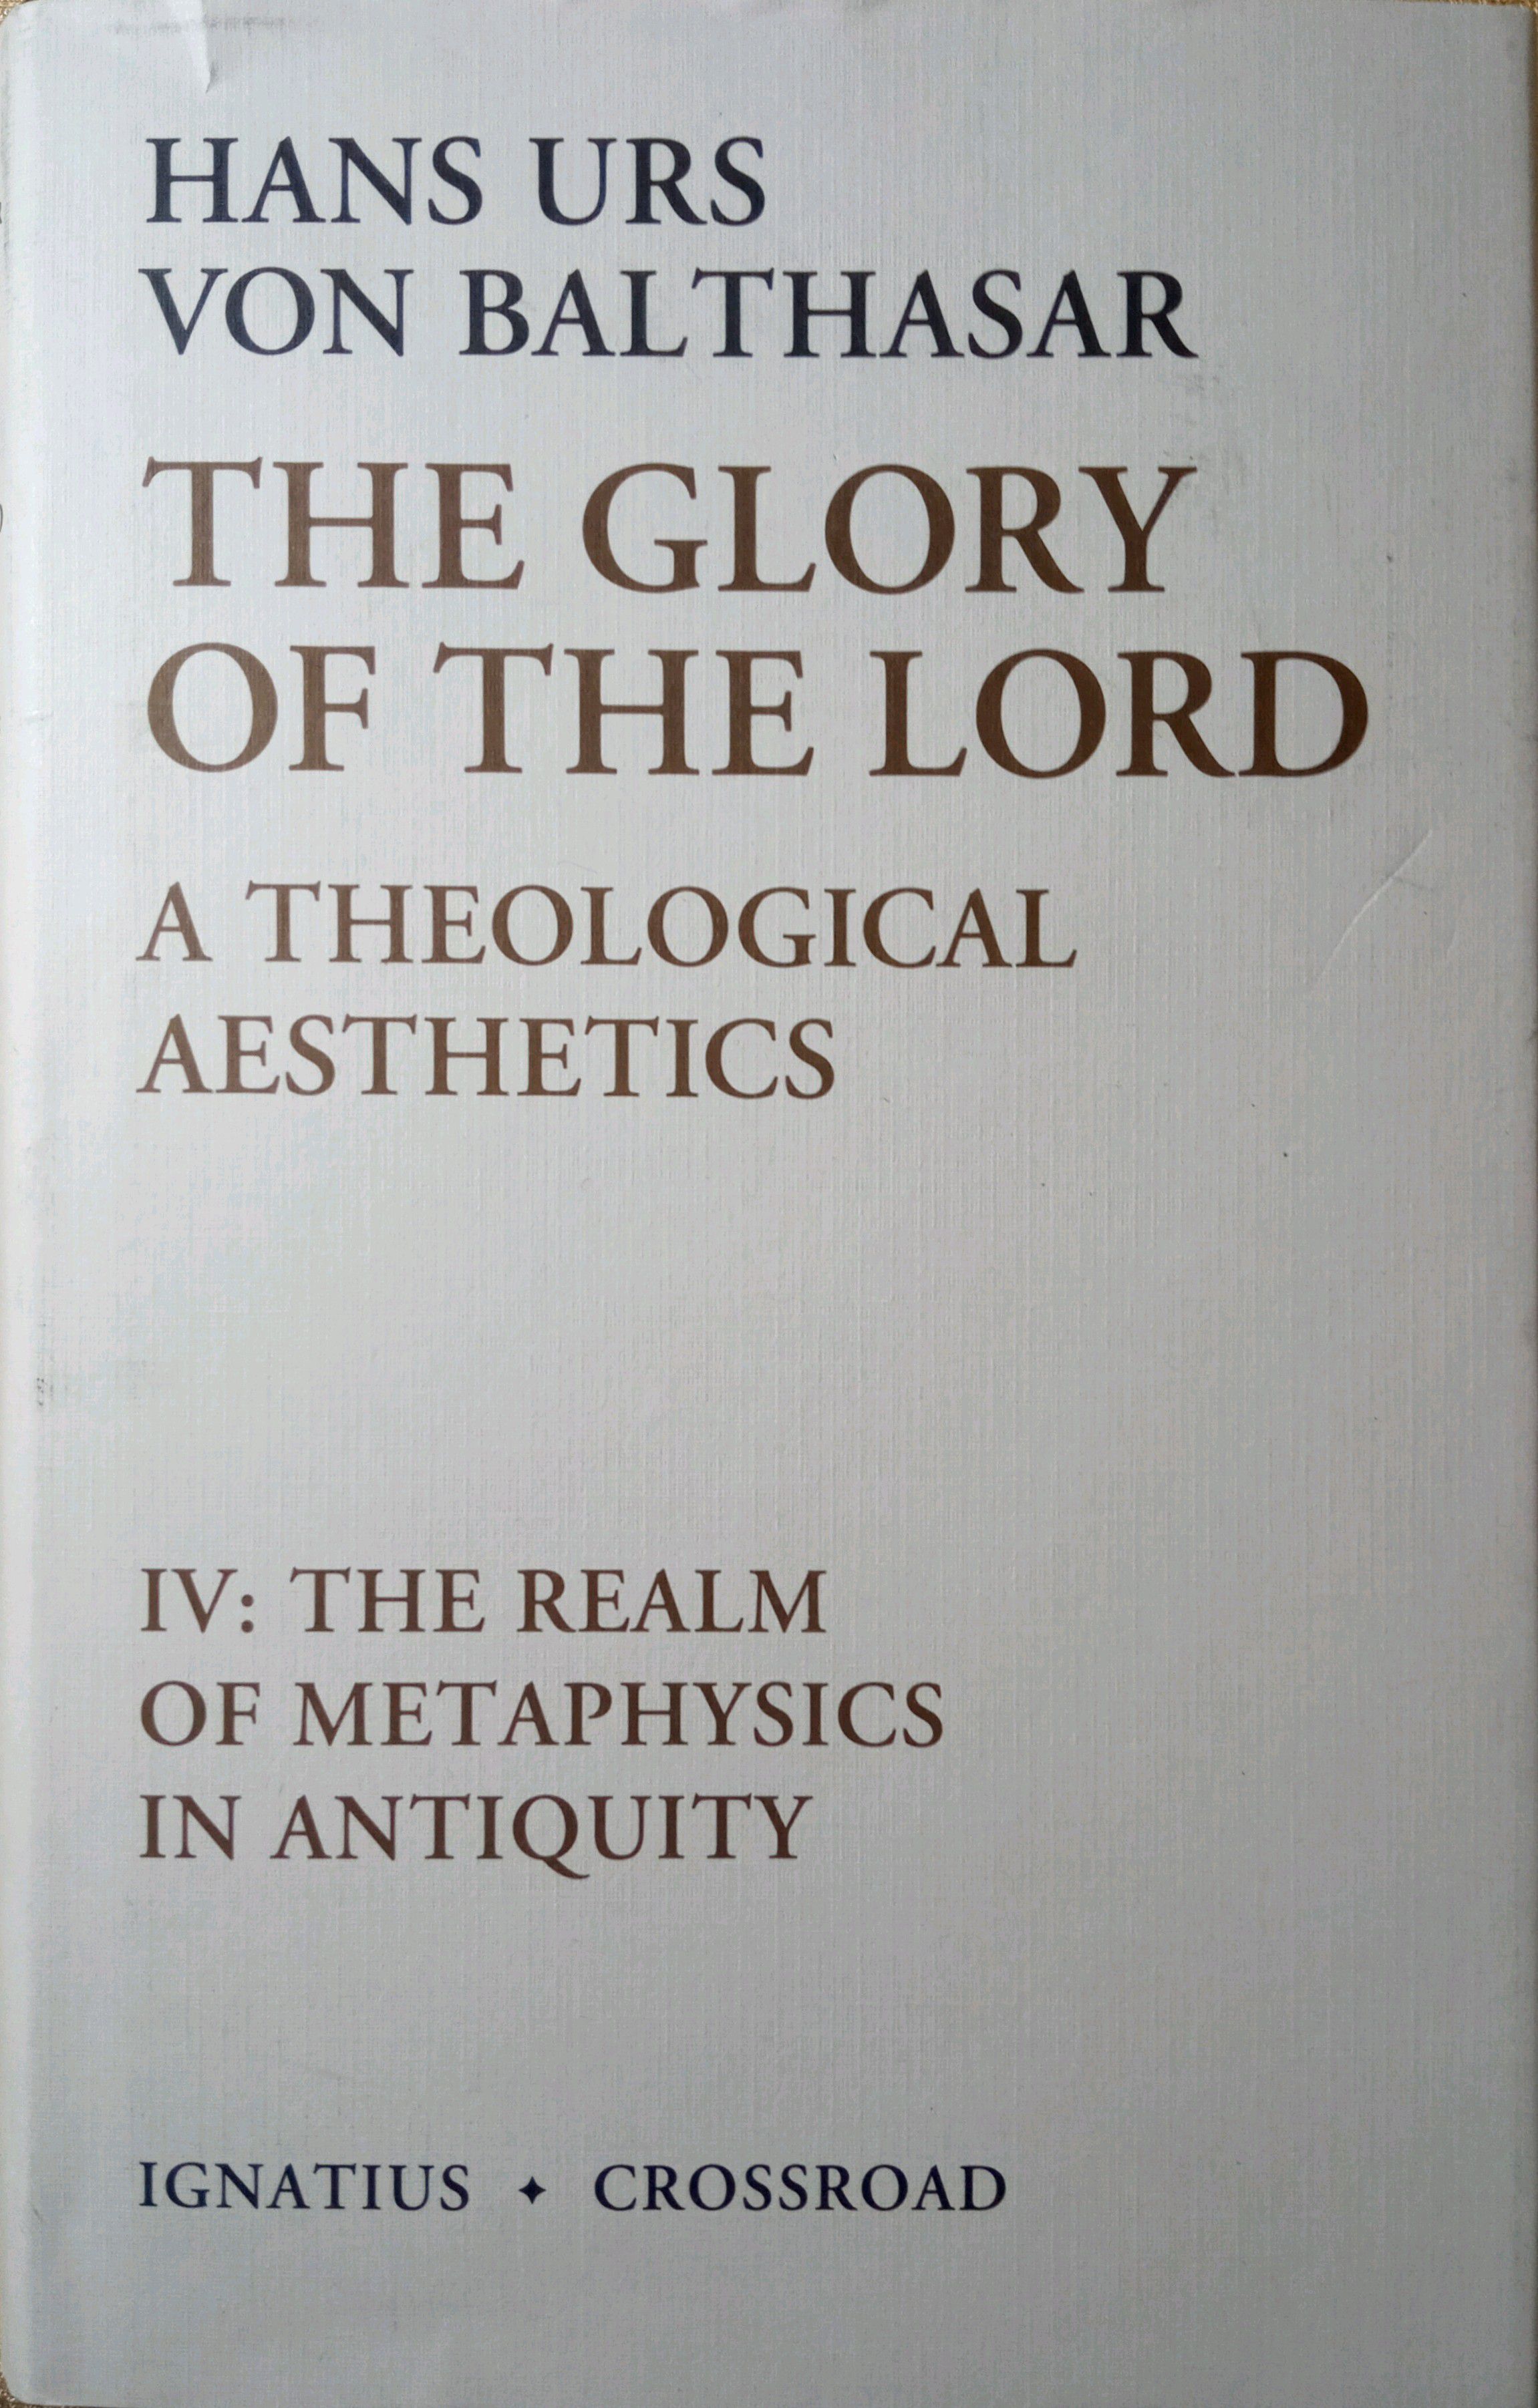 THE GLORY OF THE LORD: A THEOLOGICAL AESTHETICS. THE REALM OF METAPHYSICS IN ANTIQUITY